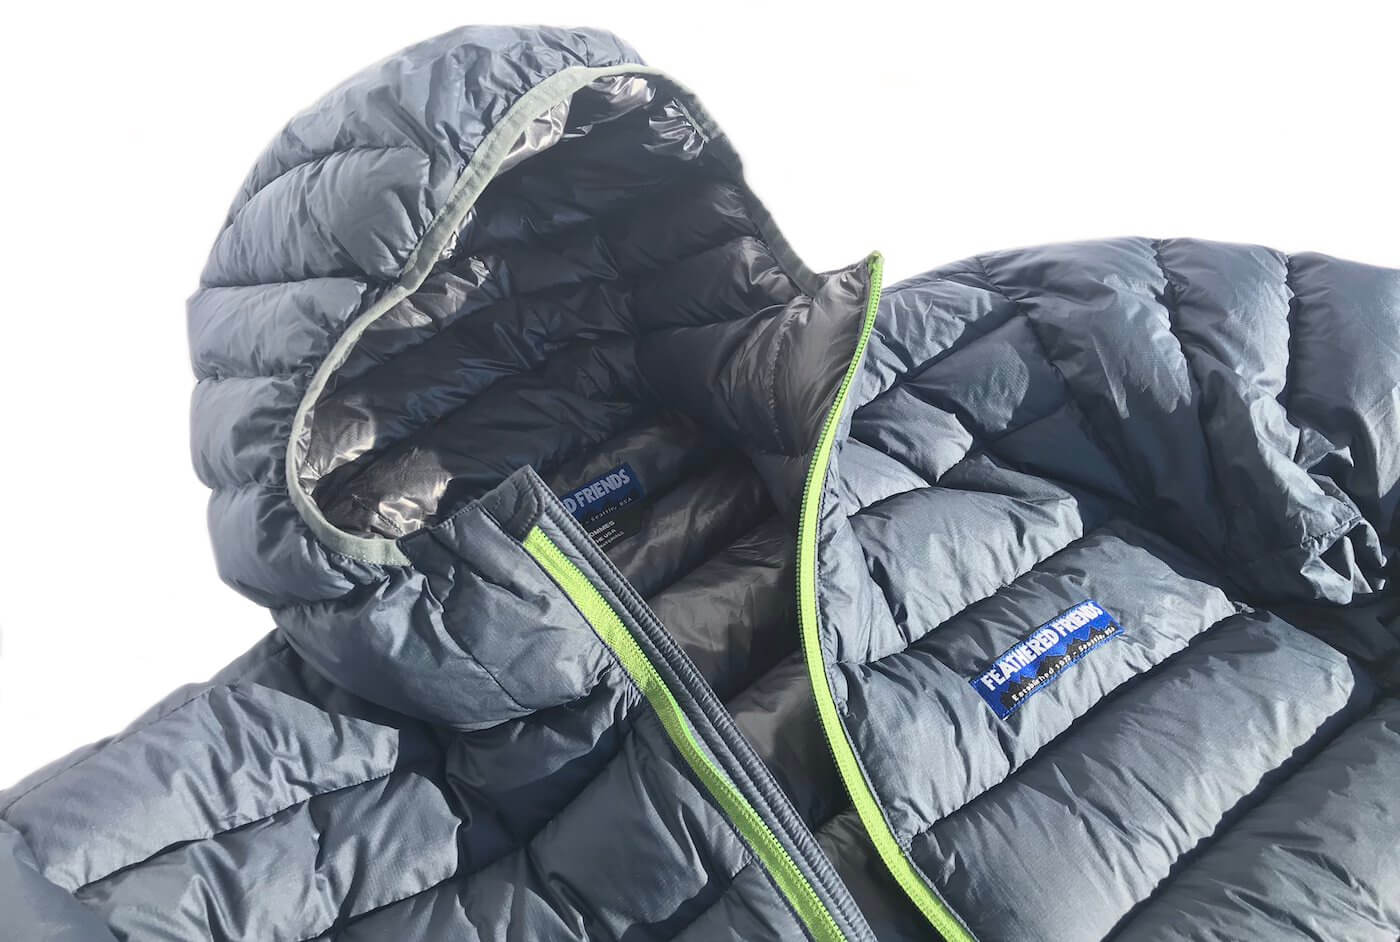 This photo shows a close up of the Feathered Friends Eos Down Jacket.